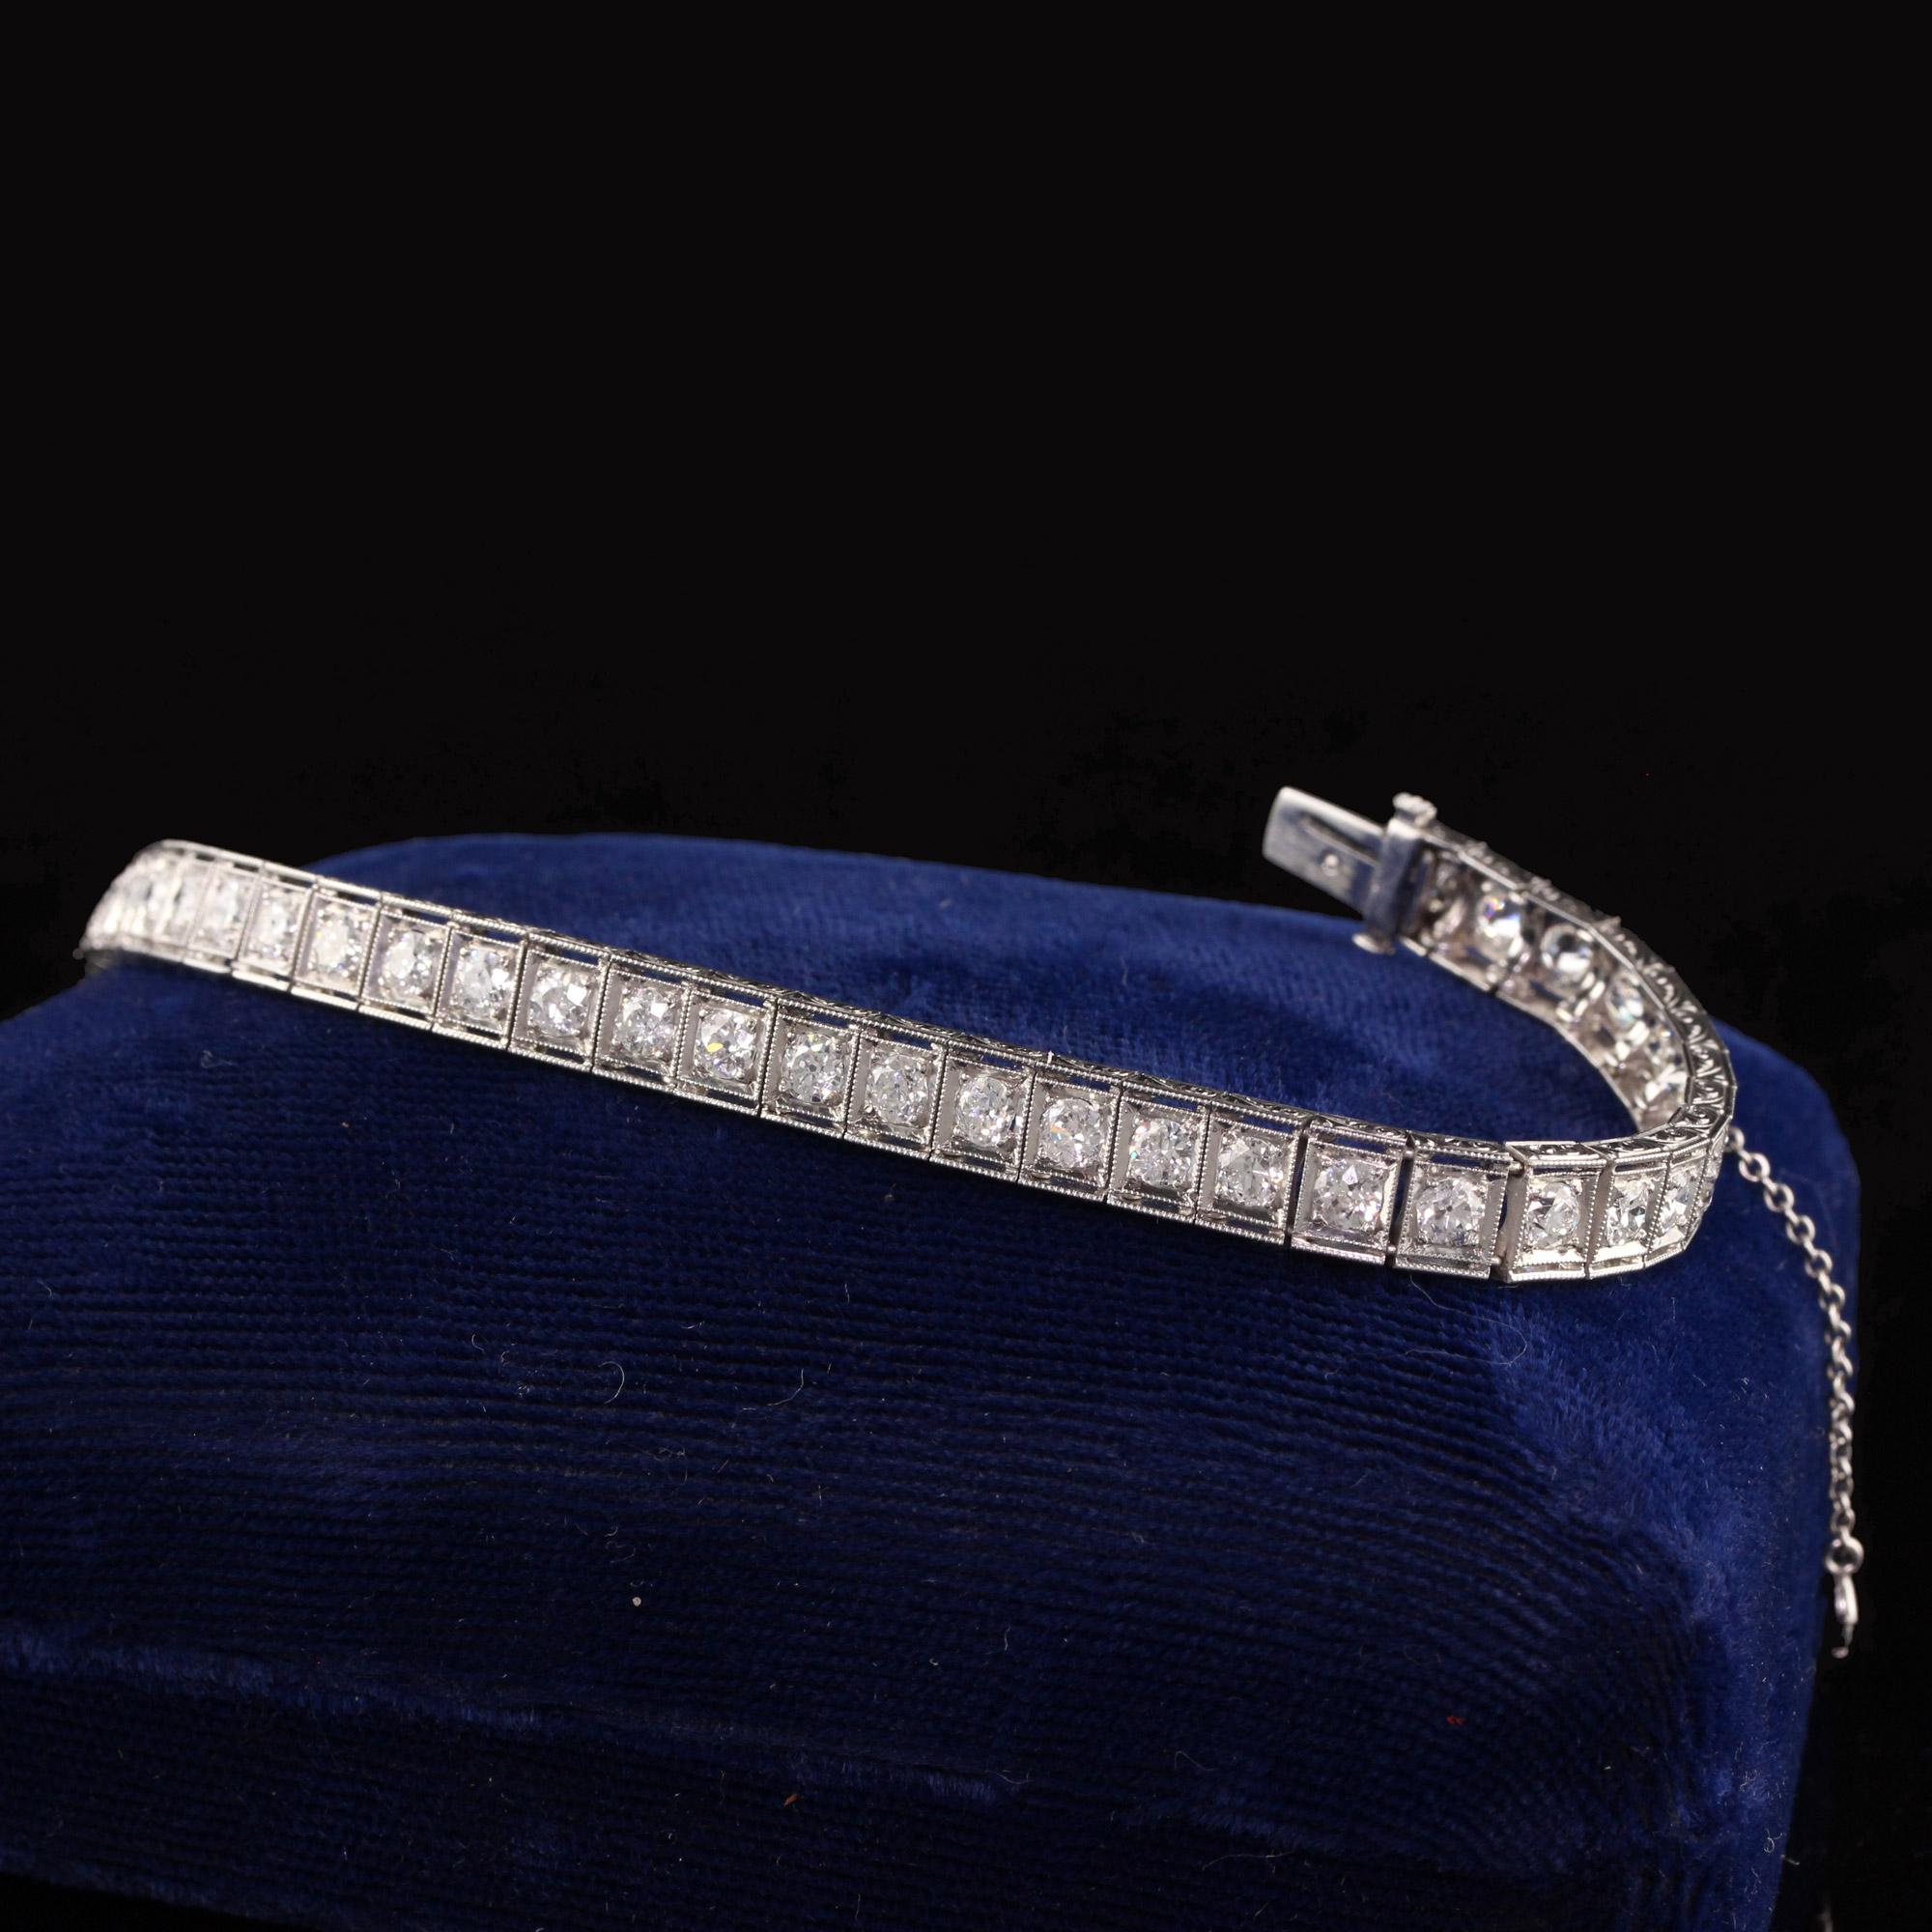 Beautiful Antique Art Deco Platinum Old European Diamond Engraved Tennis Bracelet. This incredible bracelet is crafted in platinum. There are old european diamonds going across the bracelet and it is in great condition. The engravings and milgrain